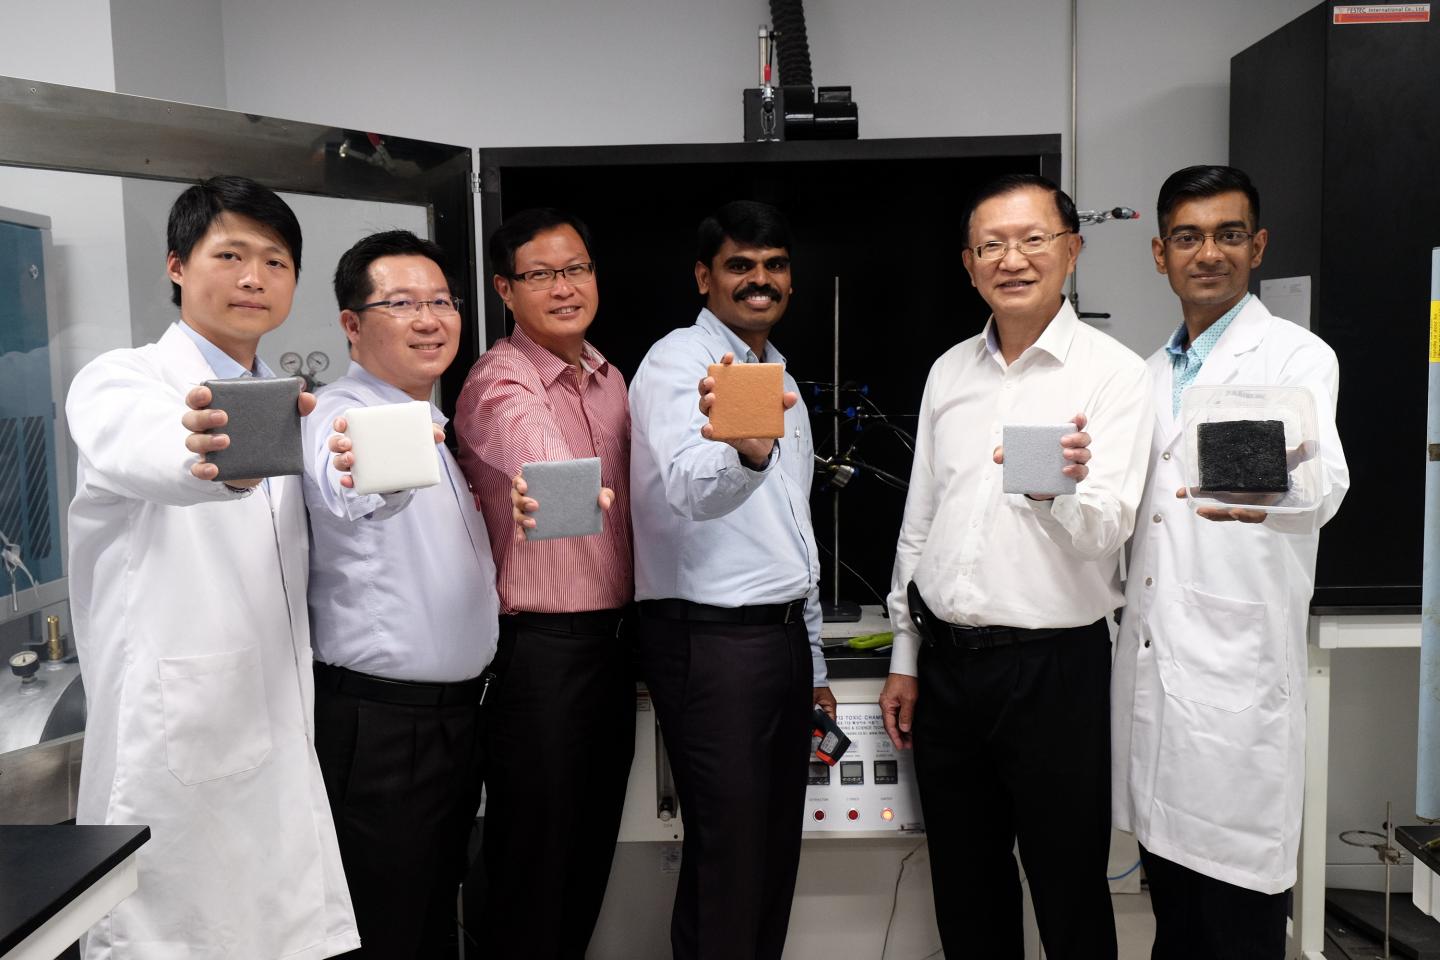 NTU and JTC Team Who Developed the New Fire and Corrosion Resistant Coating